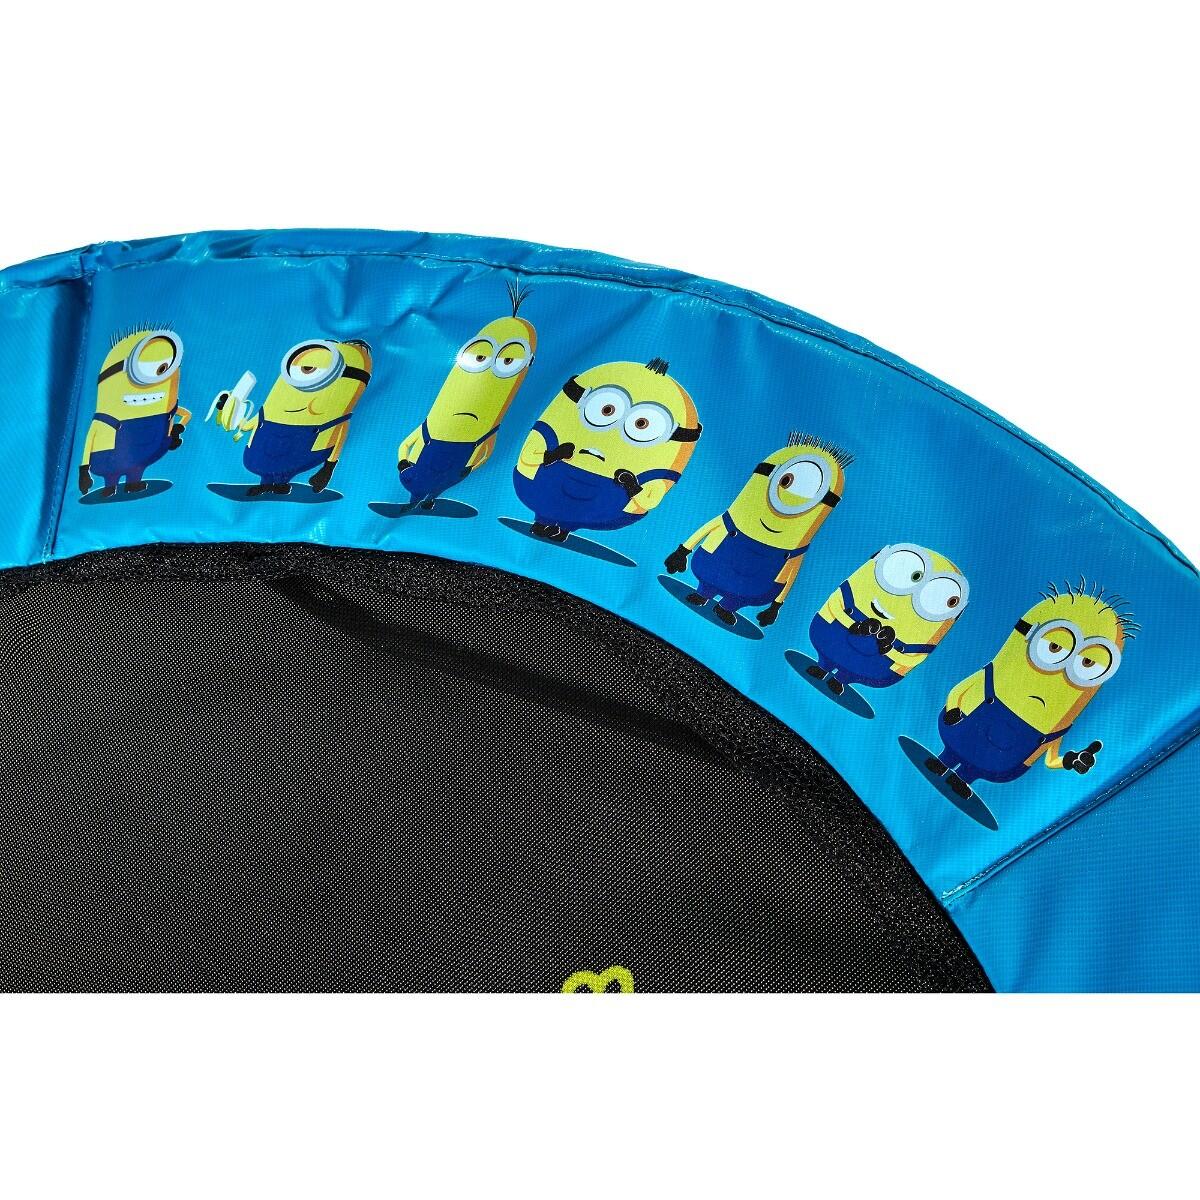 Plum Minions 4.5ft Minions Trampoline and Enclosure with Sounds 4/5